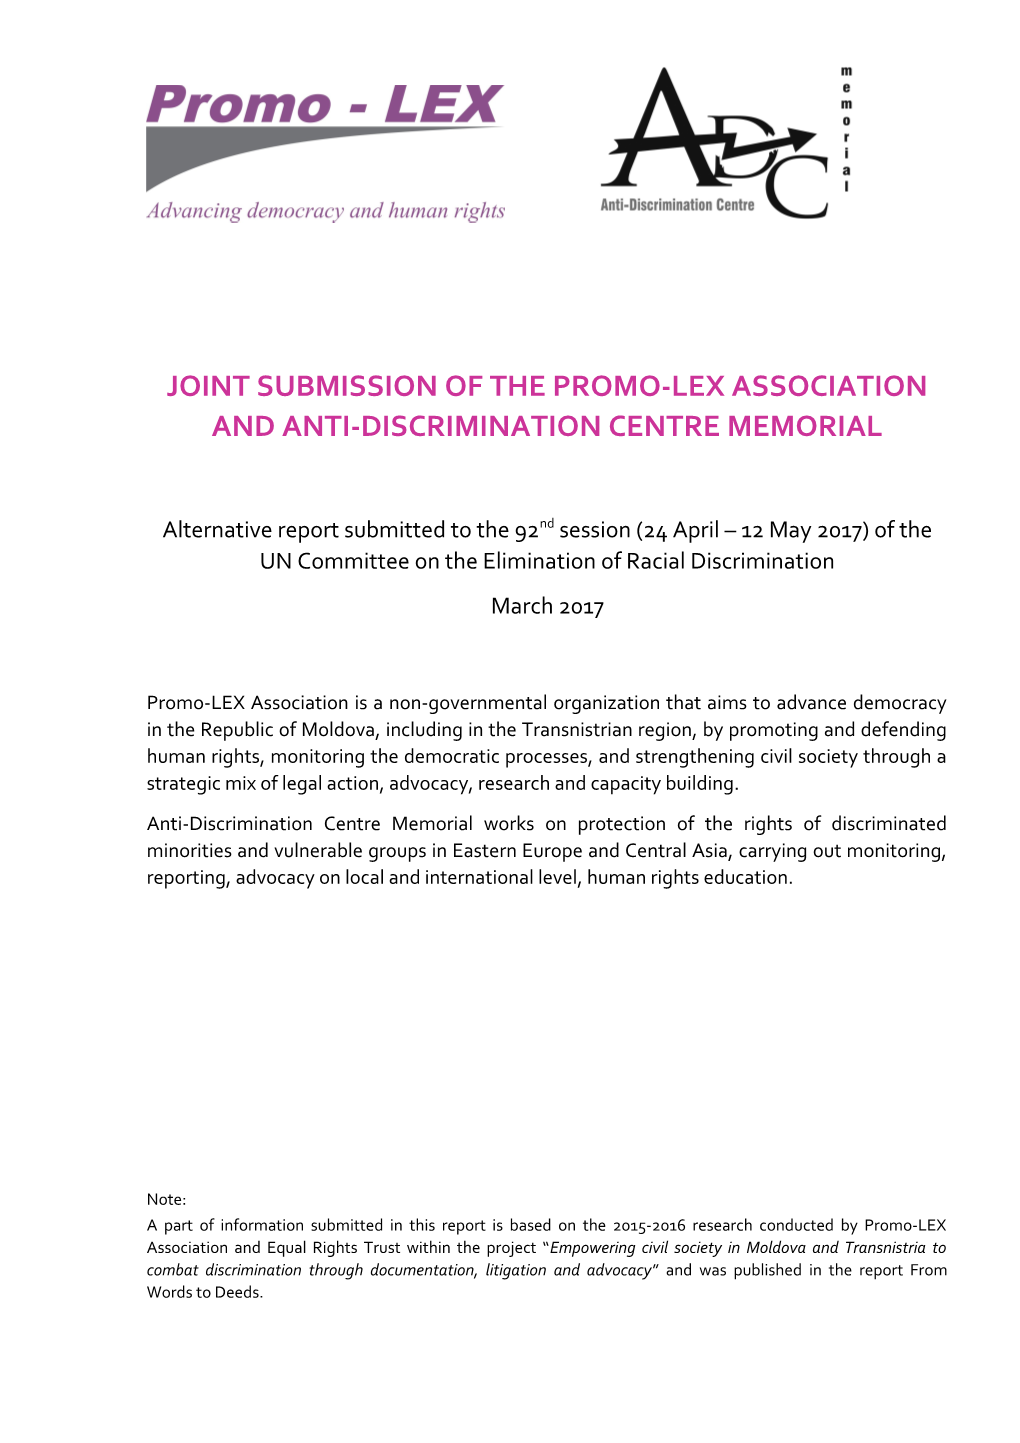 Joint Submission of the Promo-Lex Association and Anti-Discrimination Centre Memorial